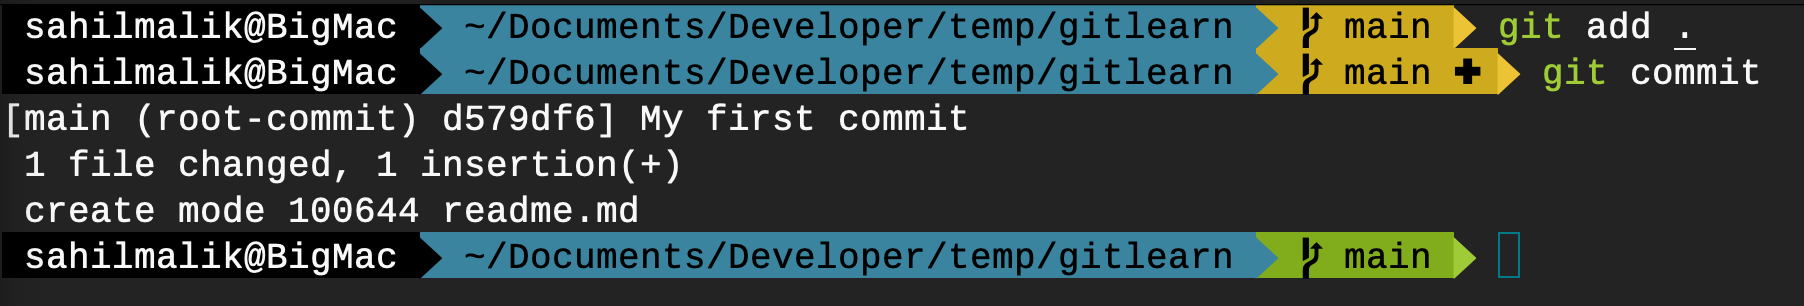 Figure 6: My first commit